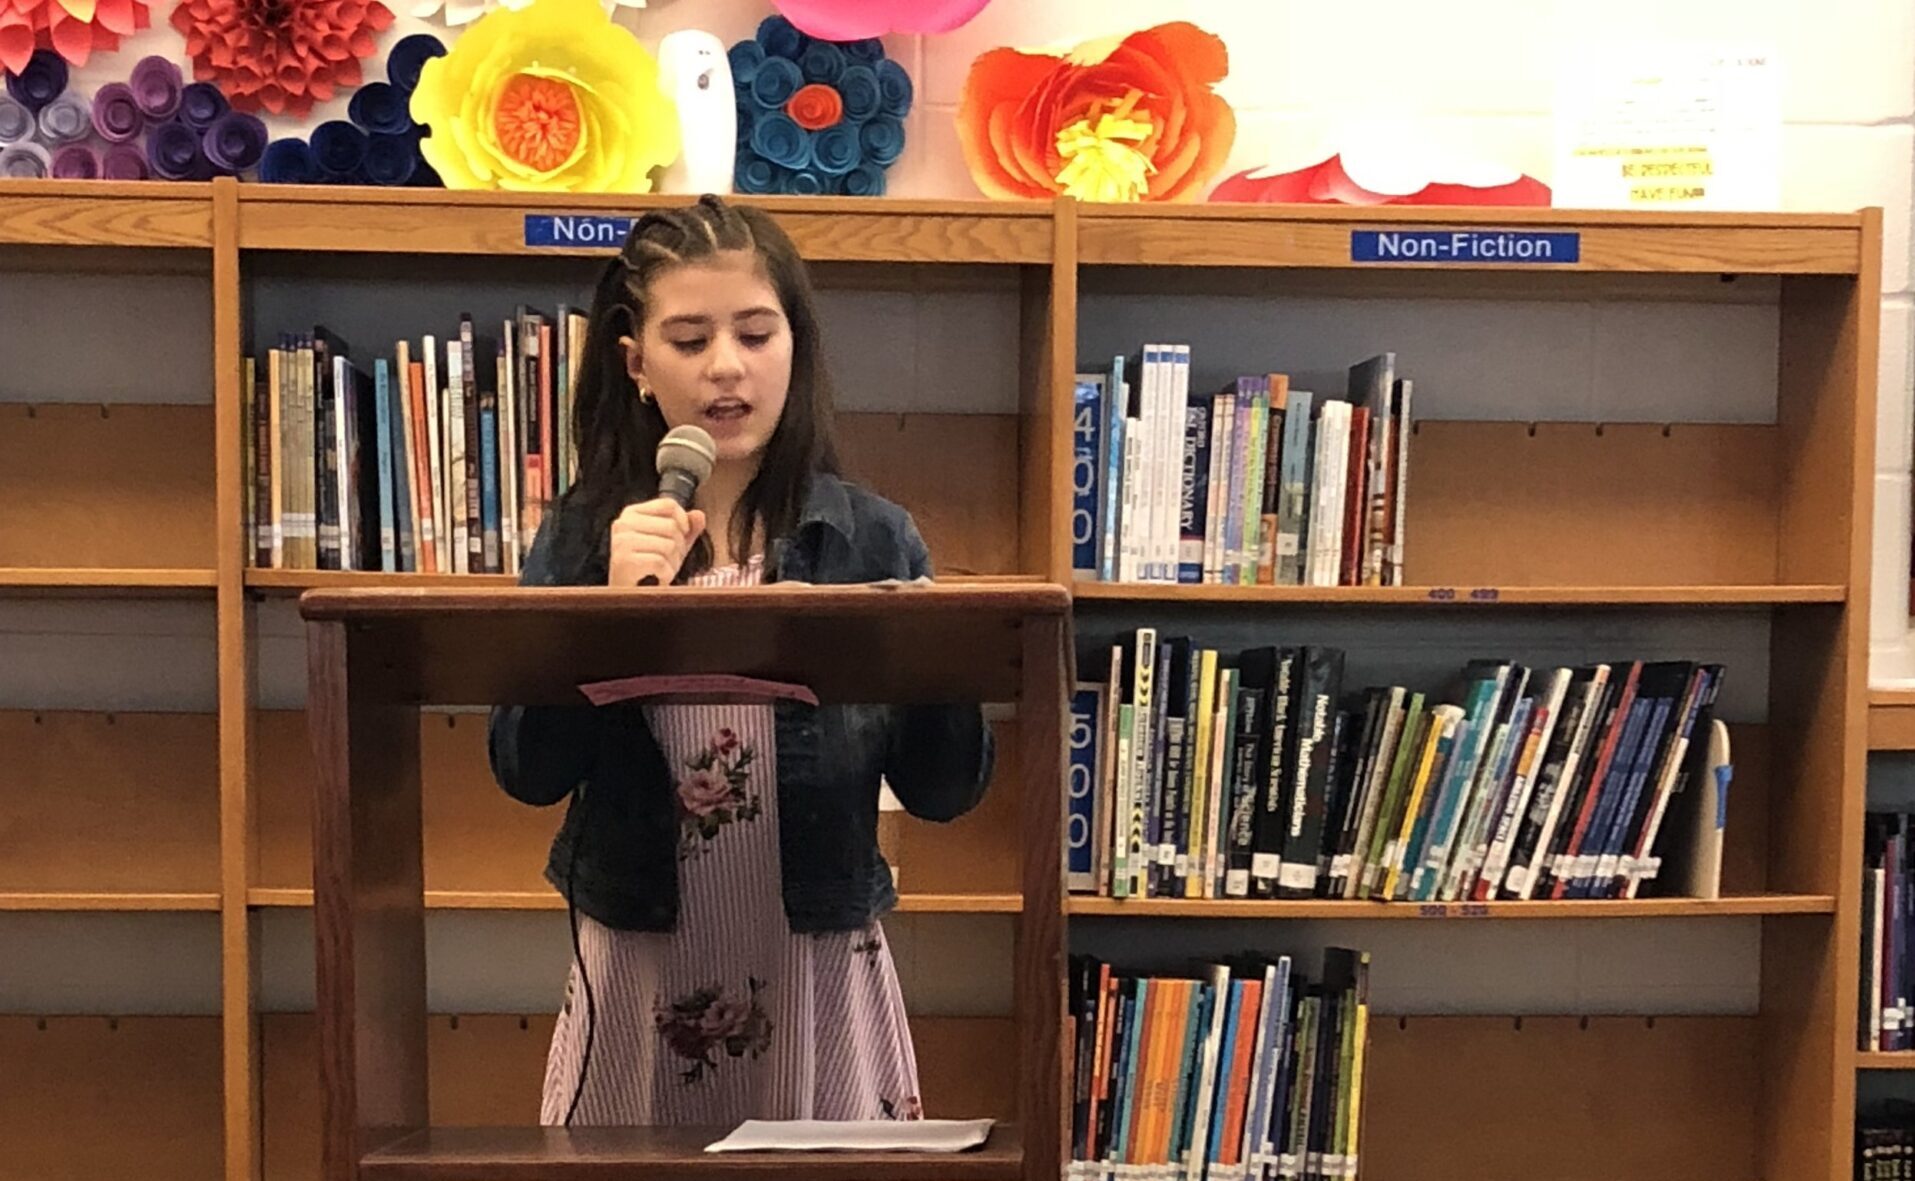 A kid stands at a wooden podium in front of school bookshelves, holding a microphone and reading from a paper on the podium.